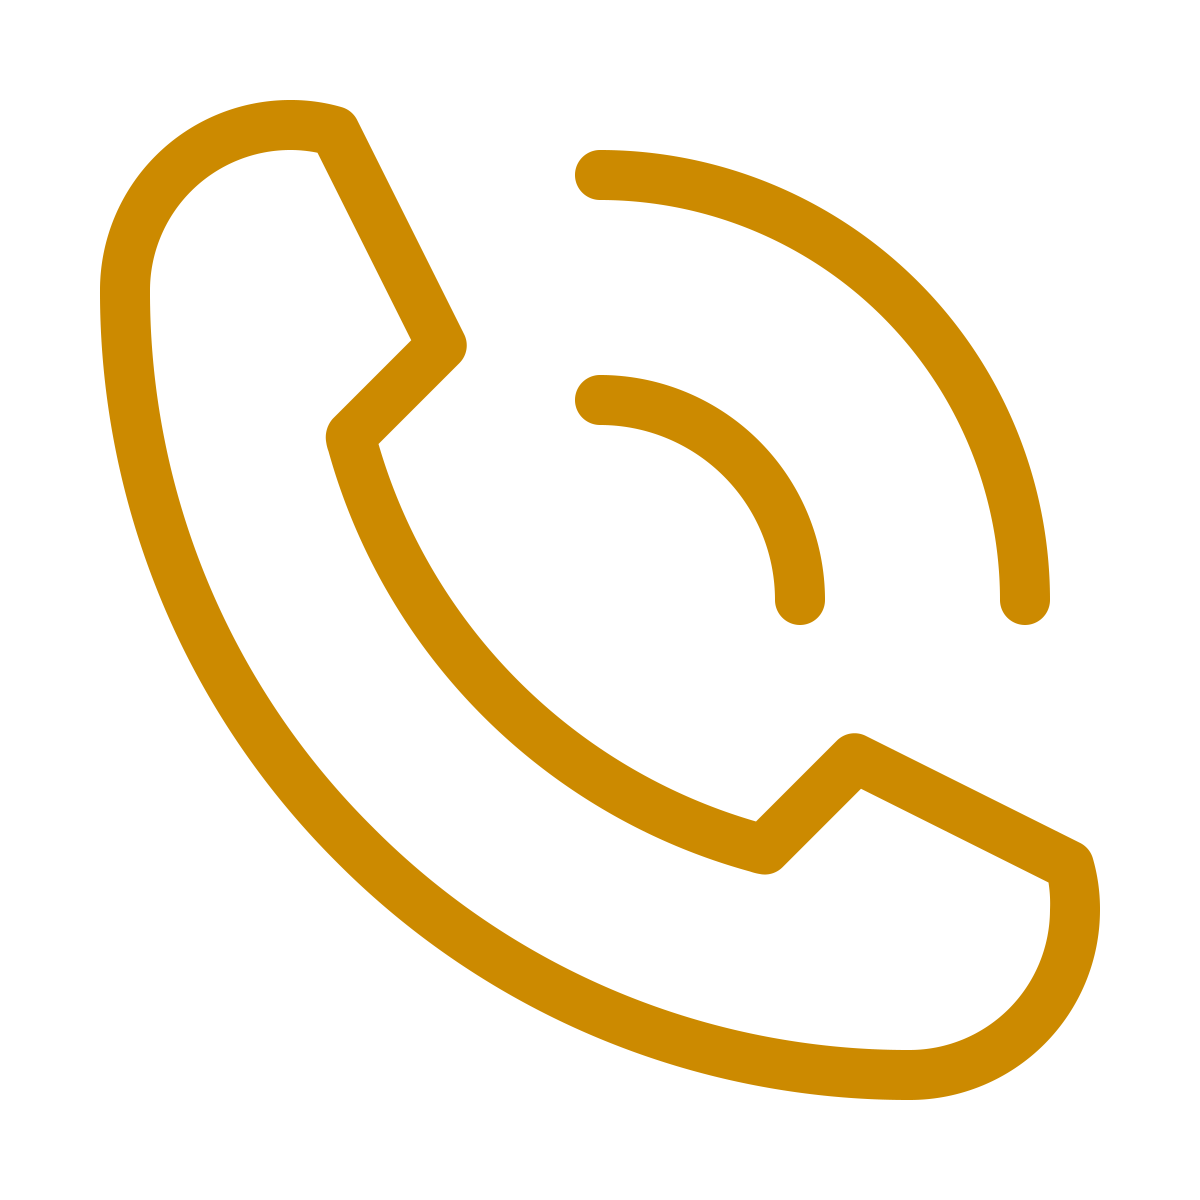 phone ringing icon in turmeric color